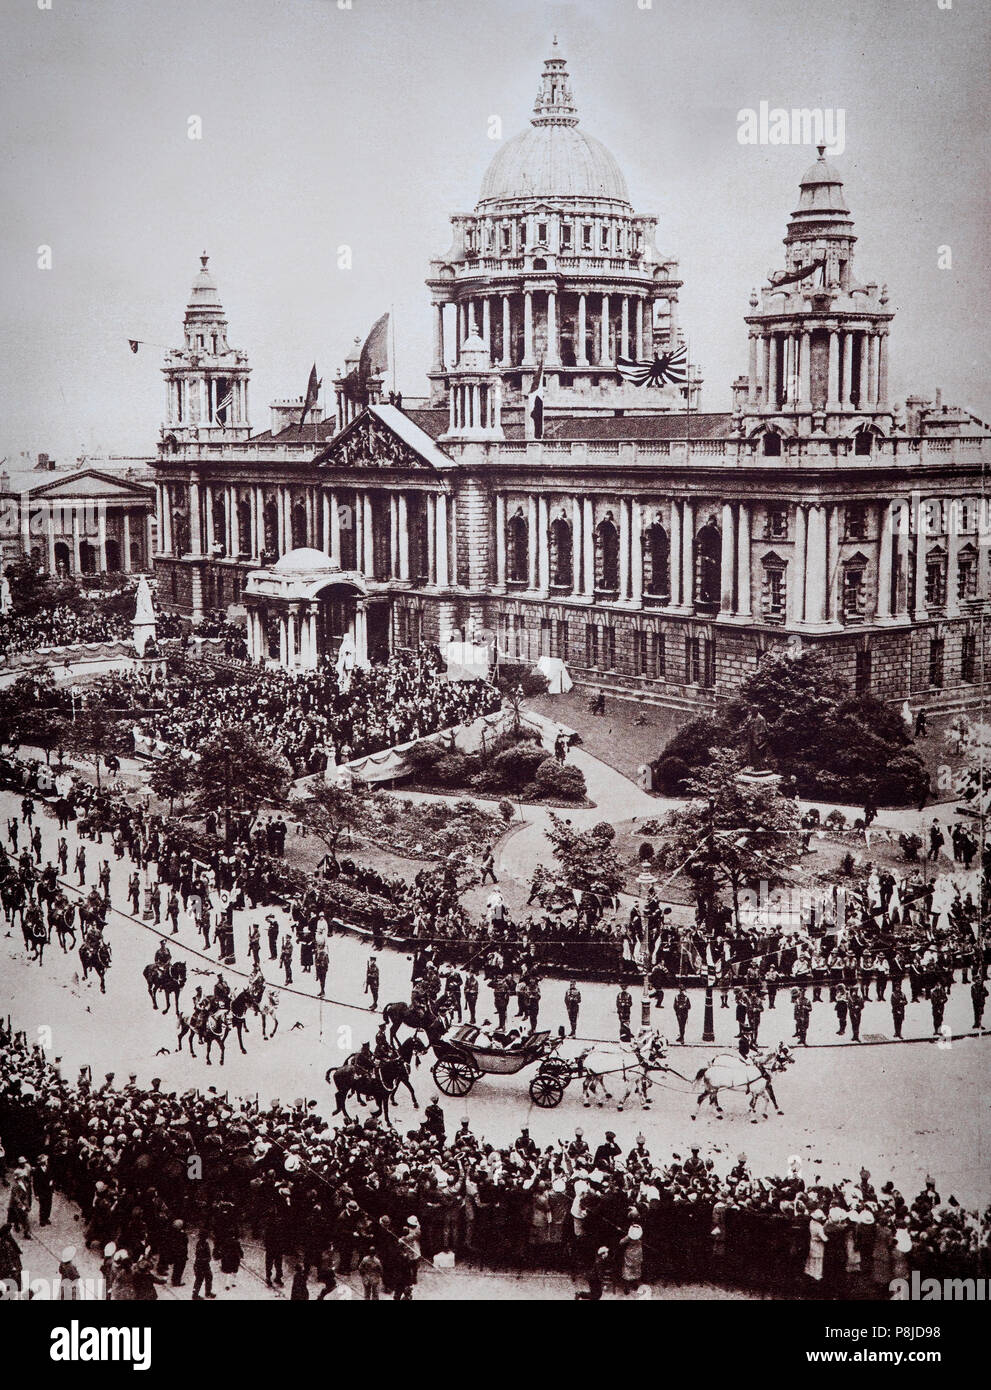 The opening of the first Parliament of Northern Ireland at City Hall, Belfast on June 22, 1921 by King George following Northern Ireland's general election  held on 24 May 1921. It was the first election to the Parliament of Northern Ireland. Ulster Unionist Party members won a two-thirds majority of votes cast and more than three-quarter of the seats in the assembly. The election took place during the Irish War of Independence, on the same day as the election to the parliament of Southern Ireland. Stock Photo